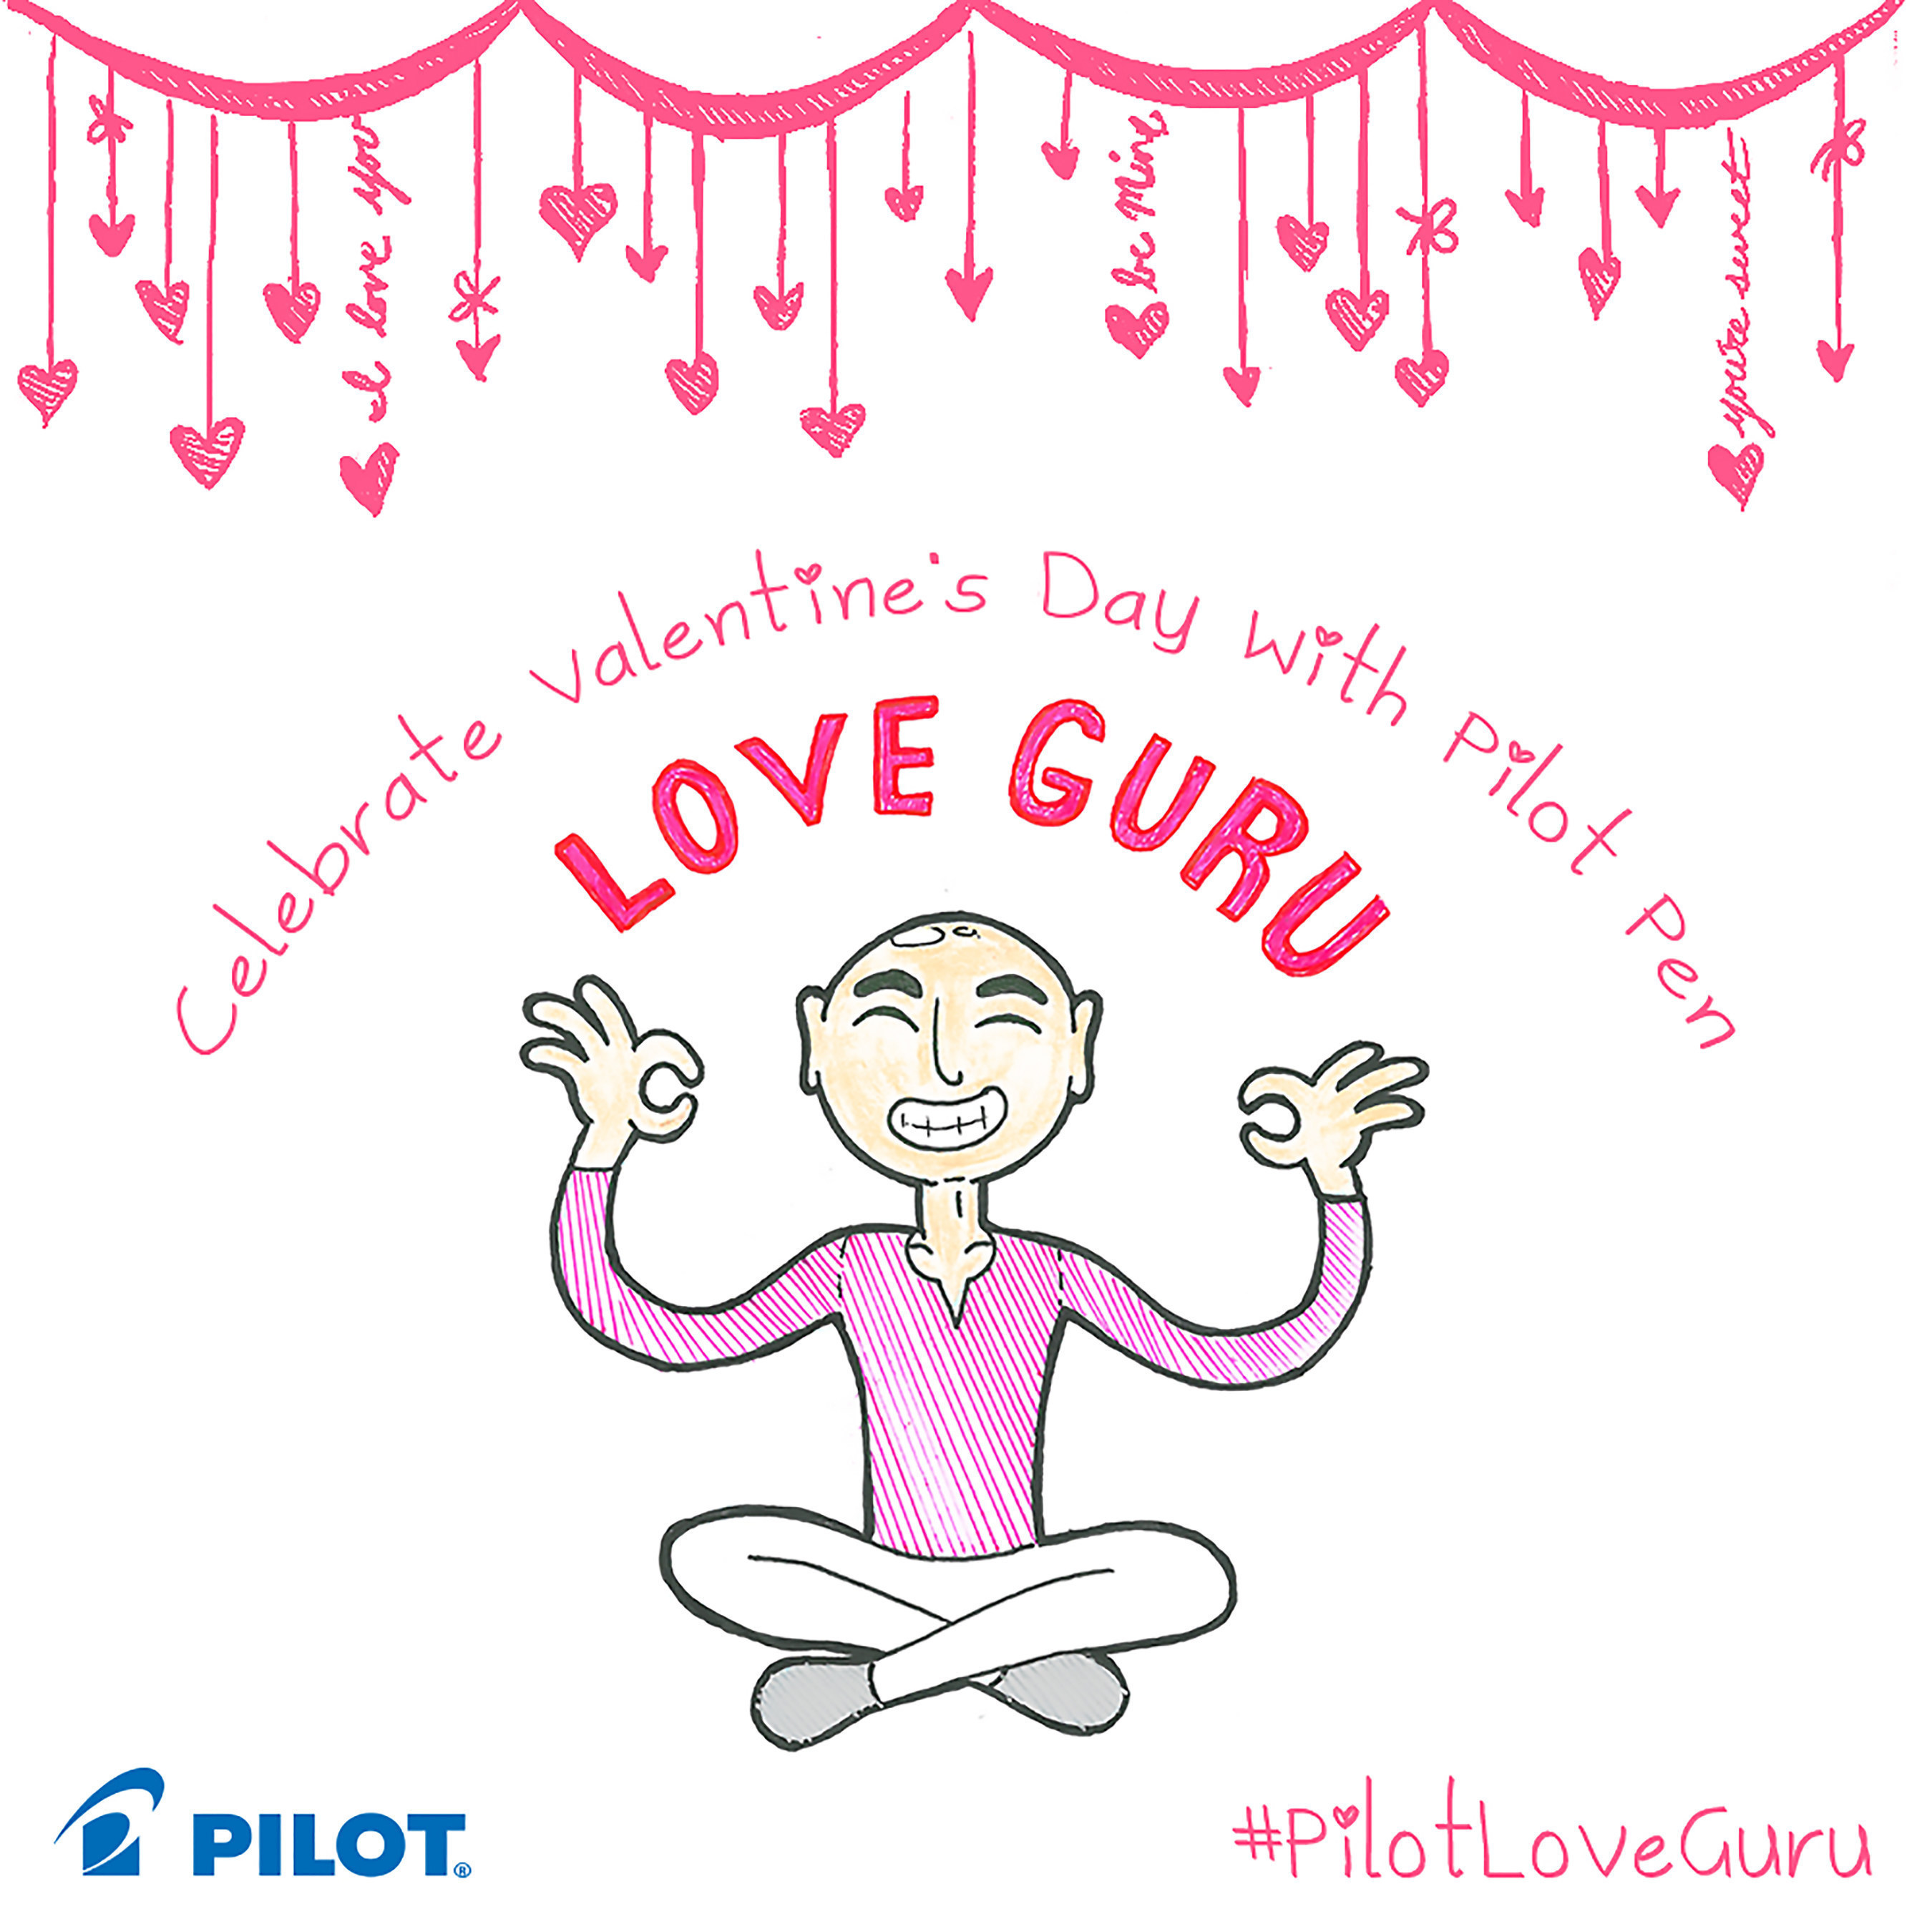 The Pilot Pen Love Guru is back with tips for a victorious Valentine's Day, including DIY gifts and custom love notes. Tweet (@PilotPenUSA), Instagram (@PilotPenUSA), or Facebook (Pilot Pen) a message tagging your crush or Valentine and include the hashtag #PilotLoveGuru and the Love Guru will send a custom card to your loved one.